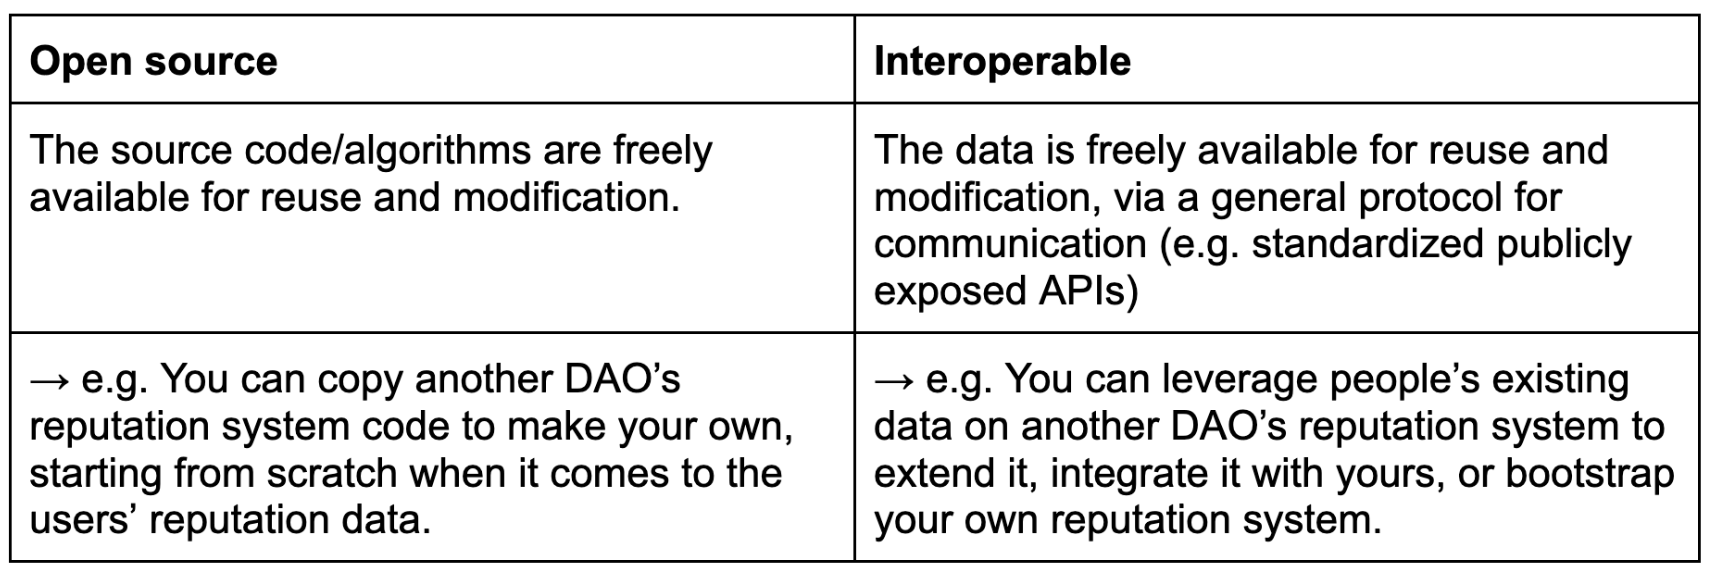 Comparing open source and interoperable systems.